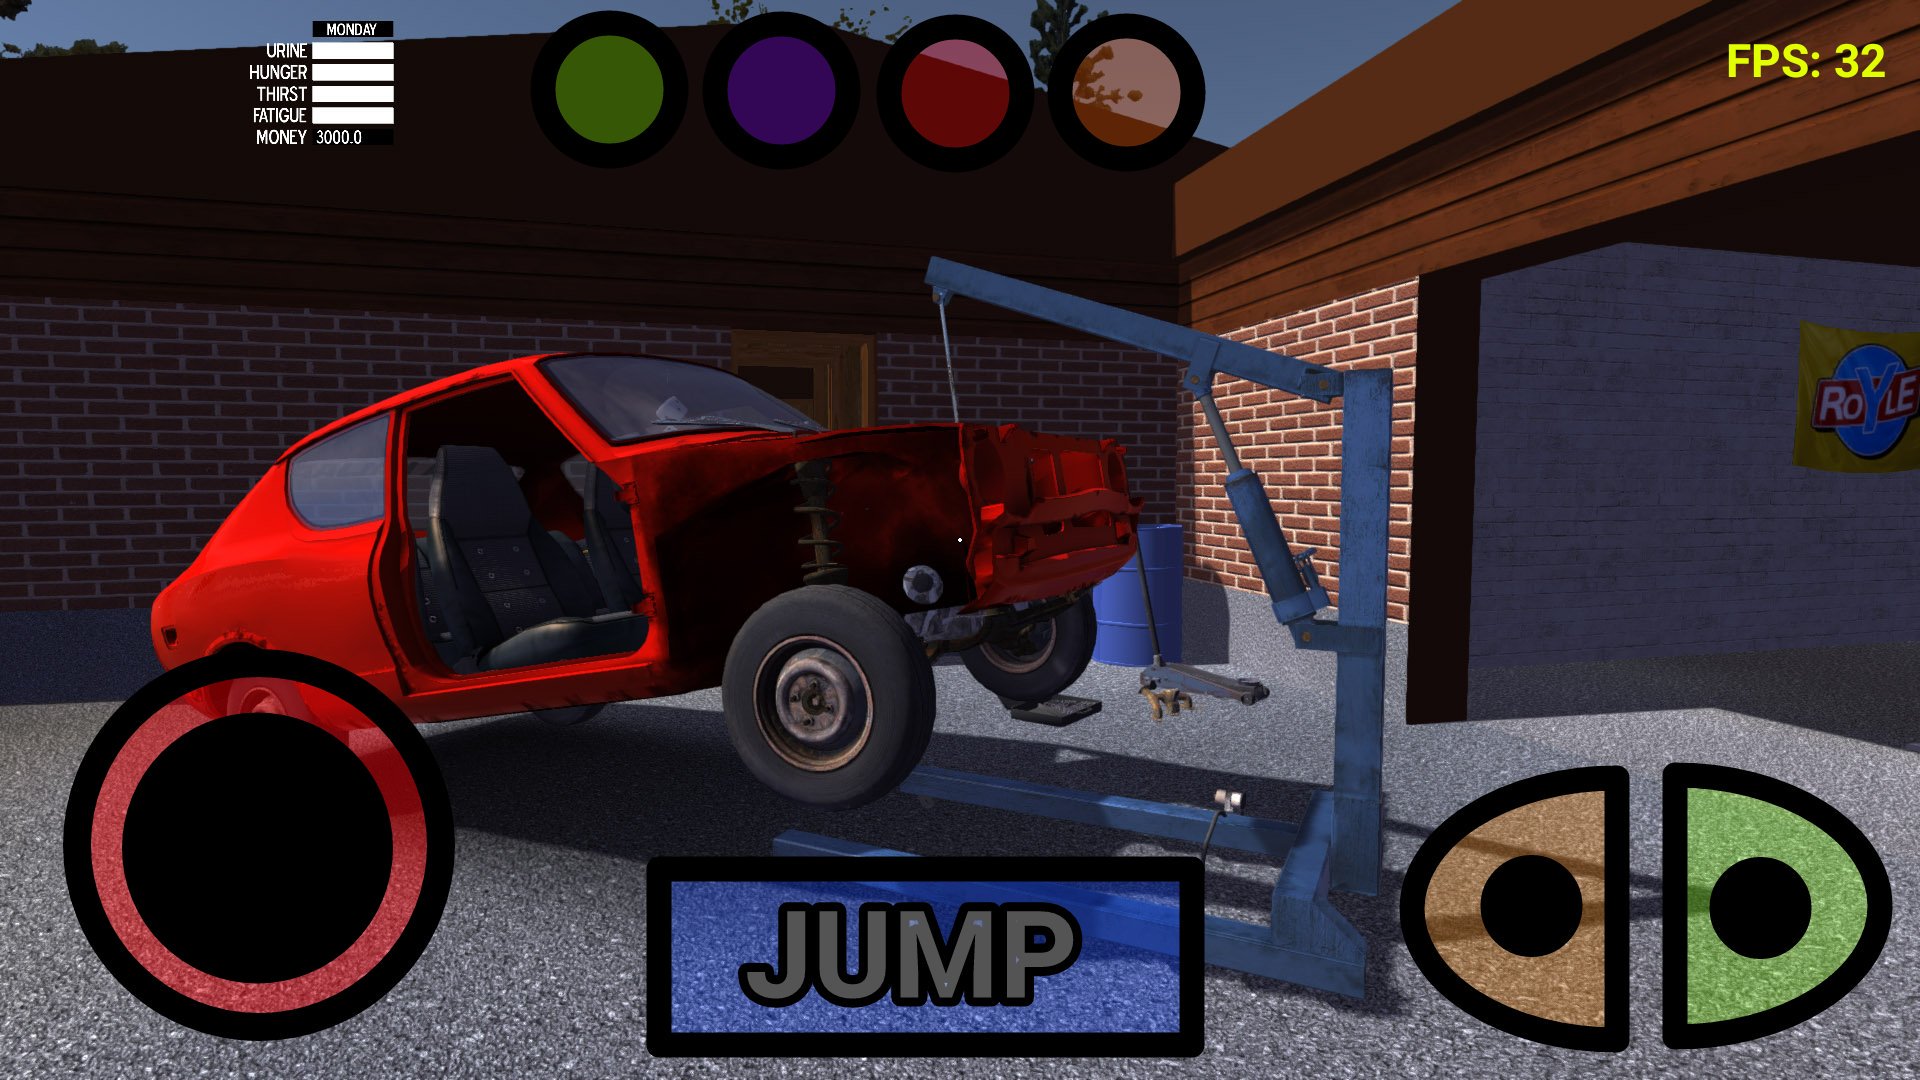 AhmetPlus on X: @mysummercargame PLEASE MY SUMMER CAR ANDROİD :) I LOVE MY  SUMMER CAR. I DON'T HAVE A PC :( THİS İS BEST GAME CREATOR :)   / X